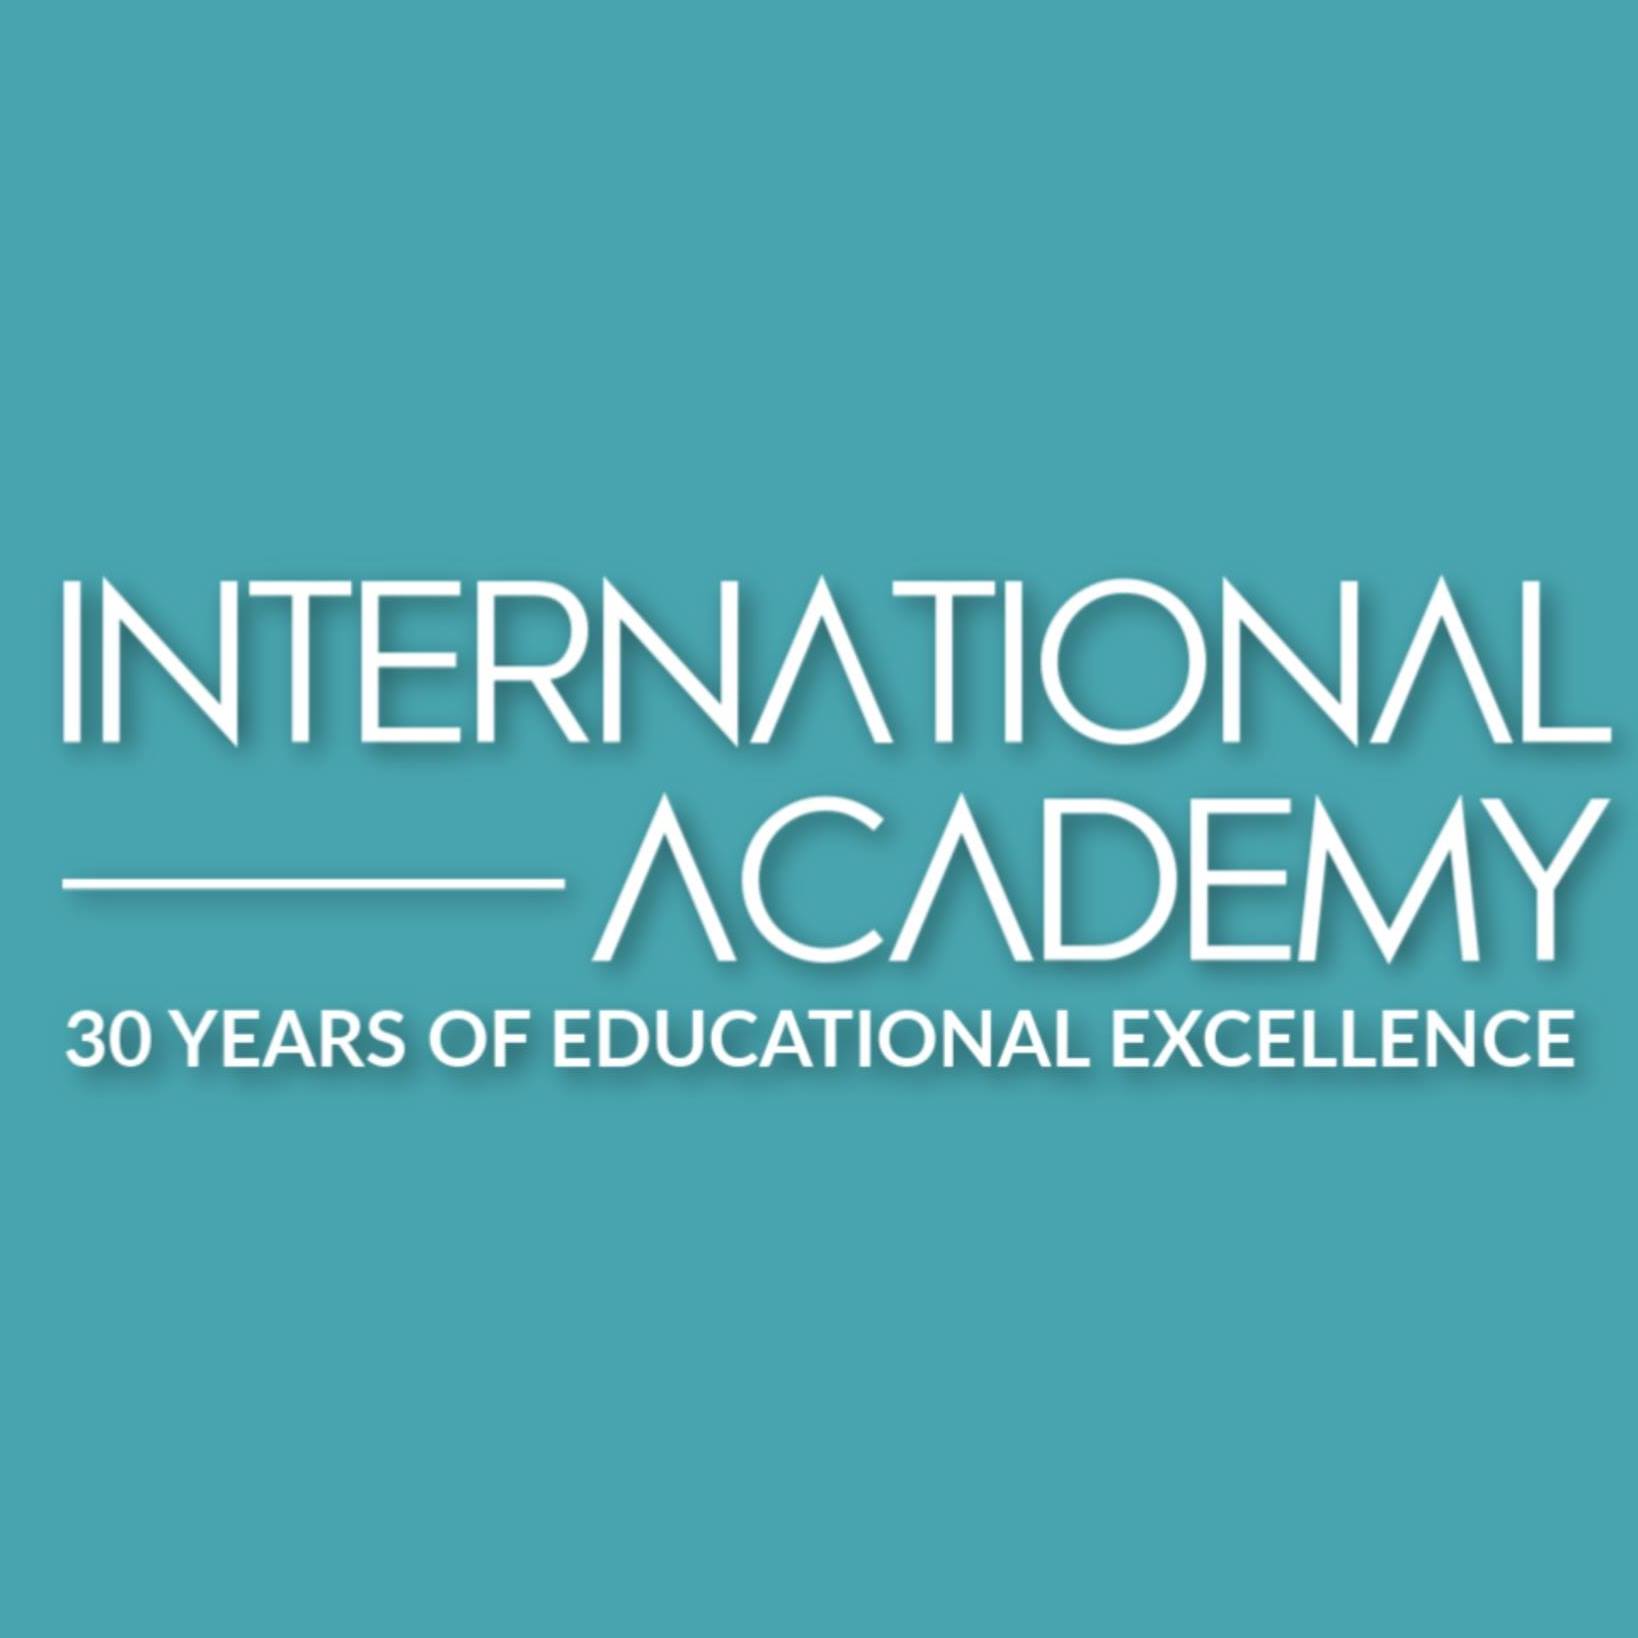 How to Apply for International Academy